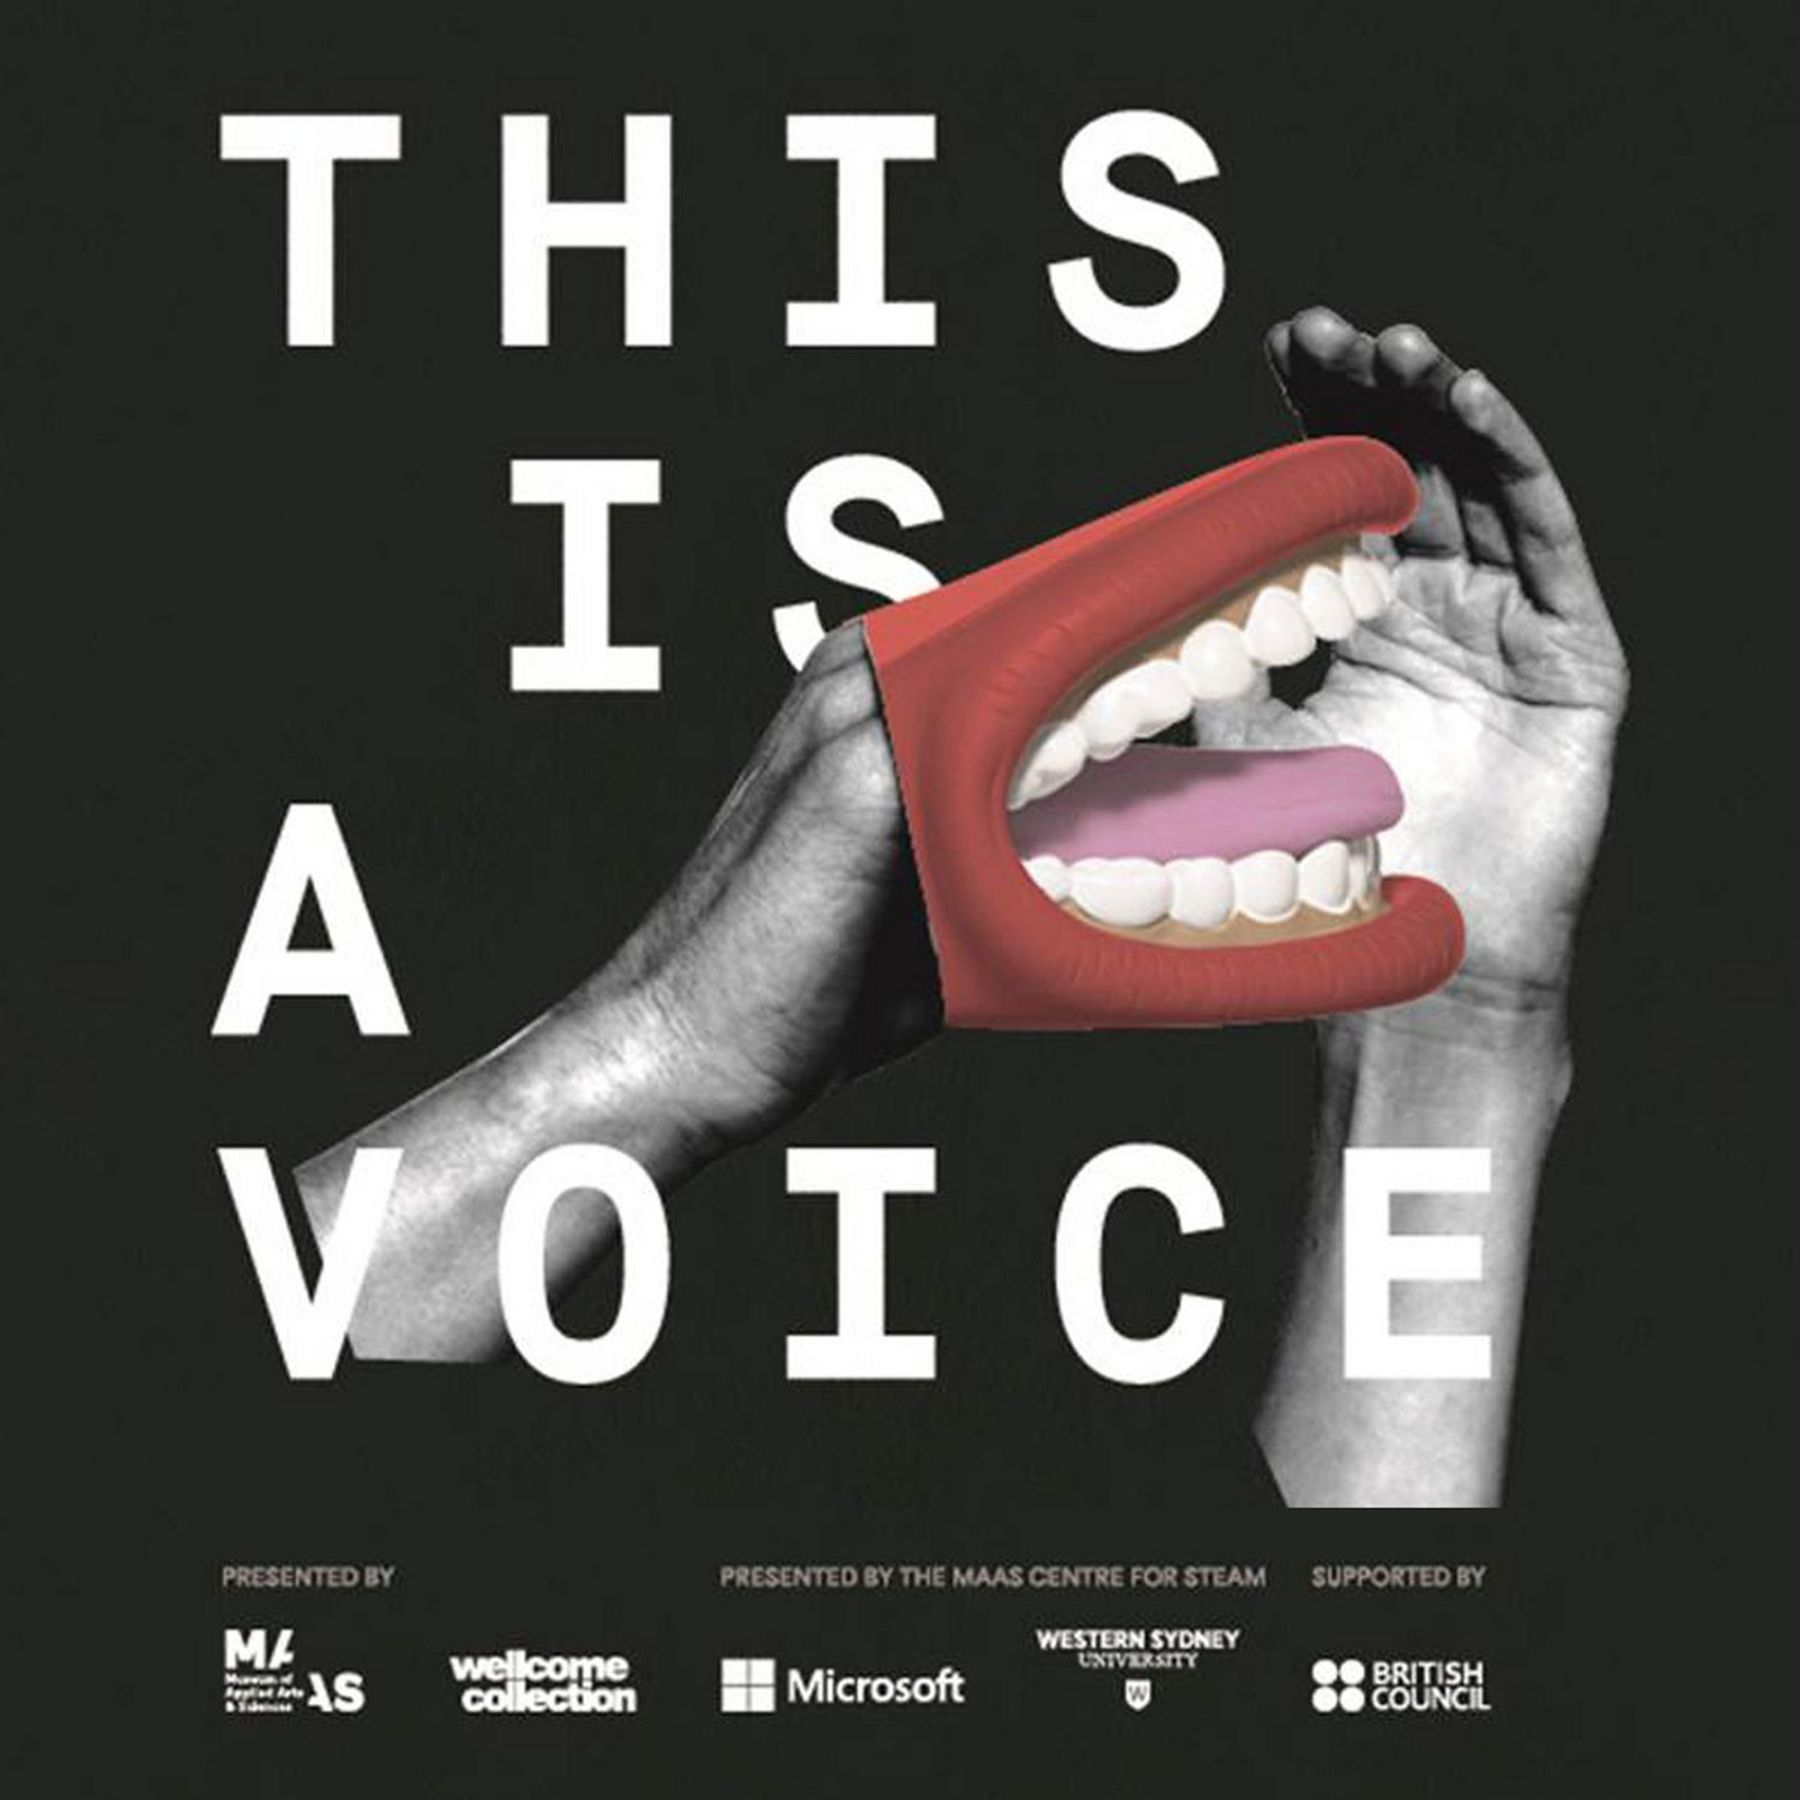 Exhibition poster showing a collage image of a mouth, by Wellcome Collection London